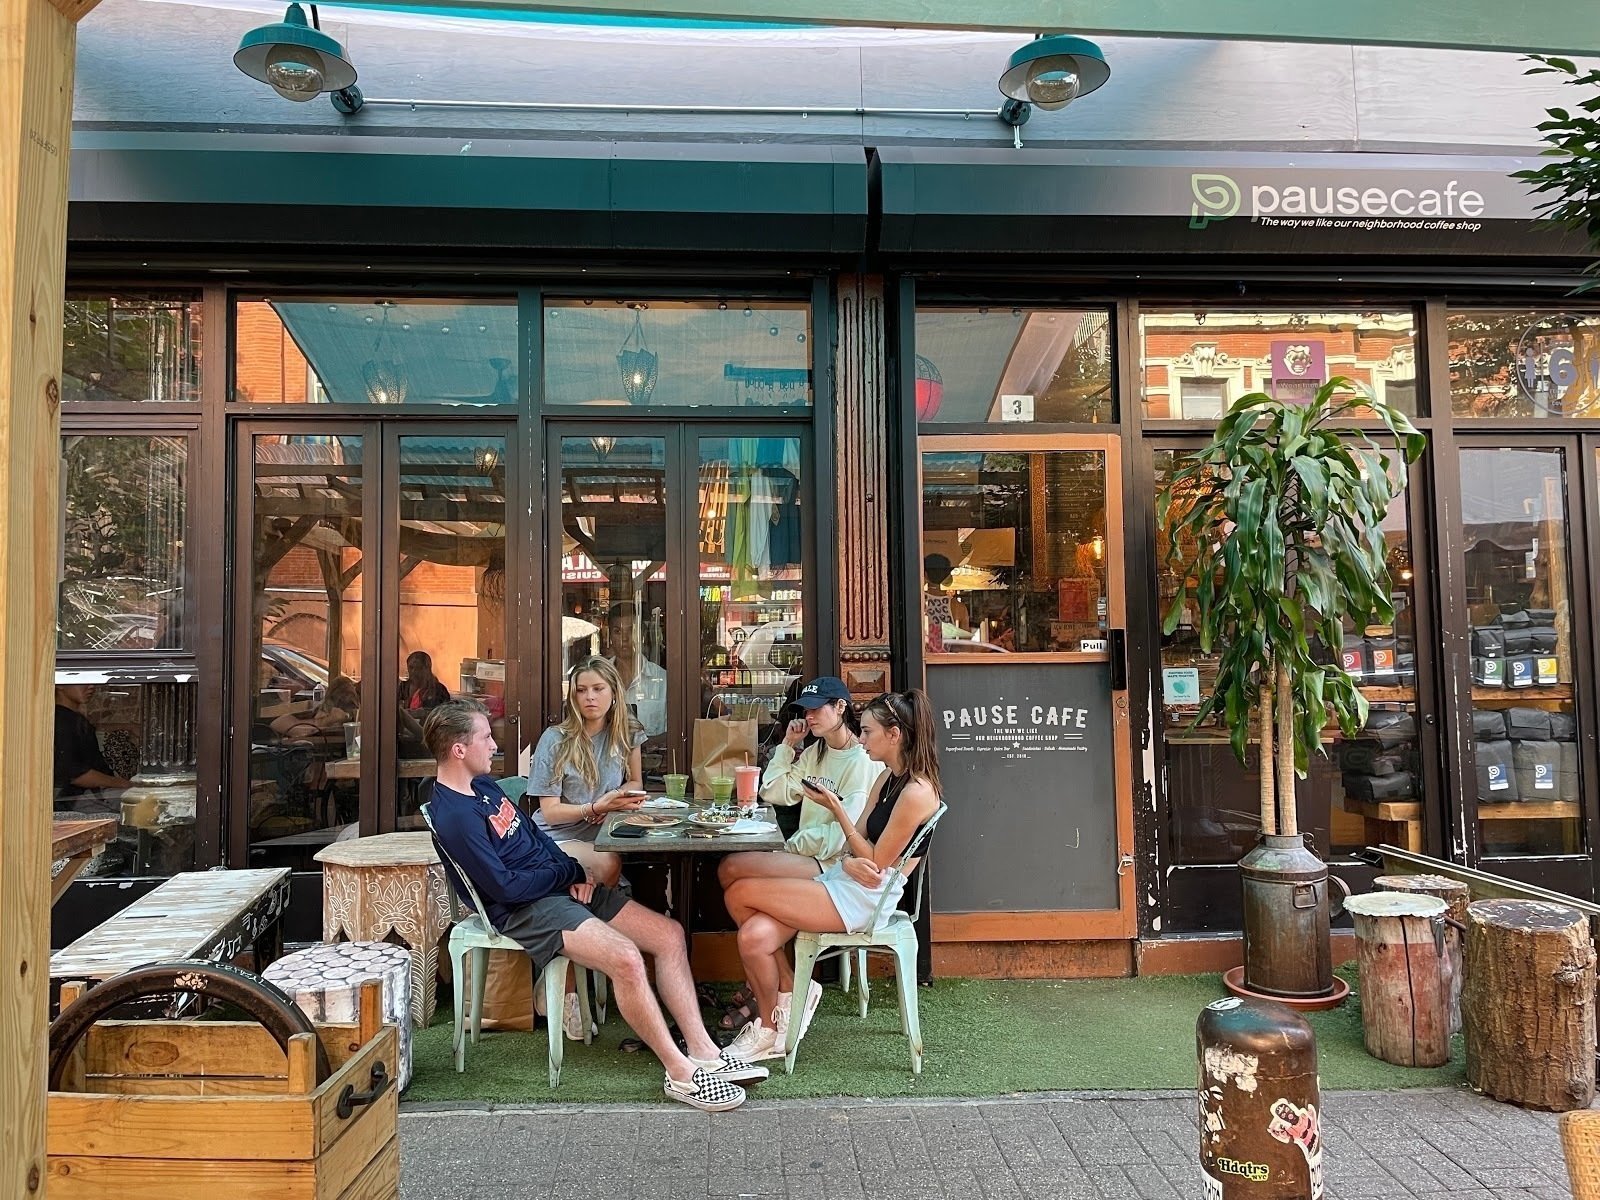 Pause Cafe: A Work-Friendly Place in New York